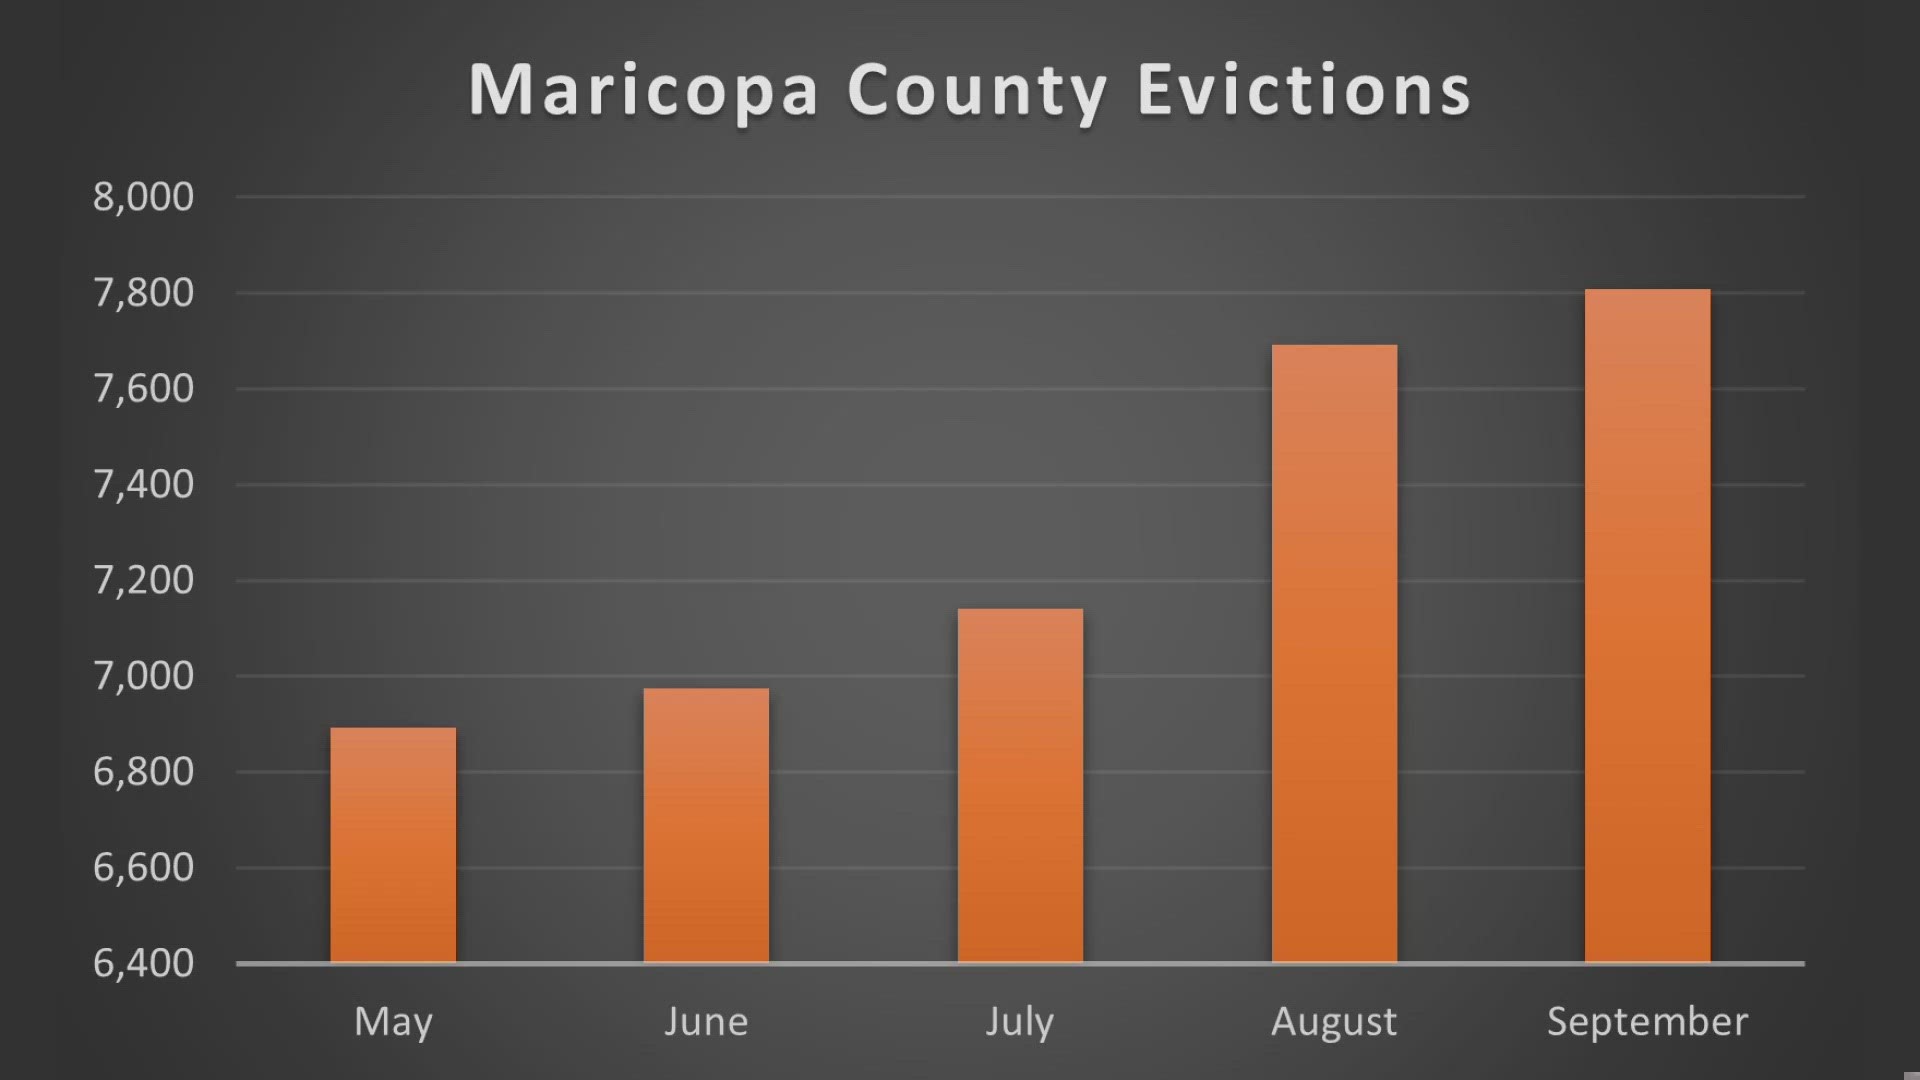 The all-time record of evictions in the Valley happened nearly two decades ago in August 2005 with 7,902. But that record could be broken soon.